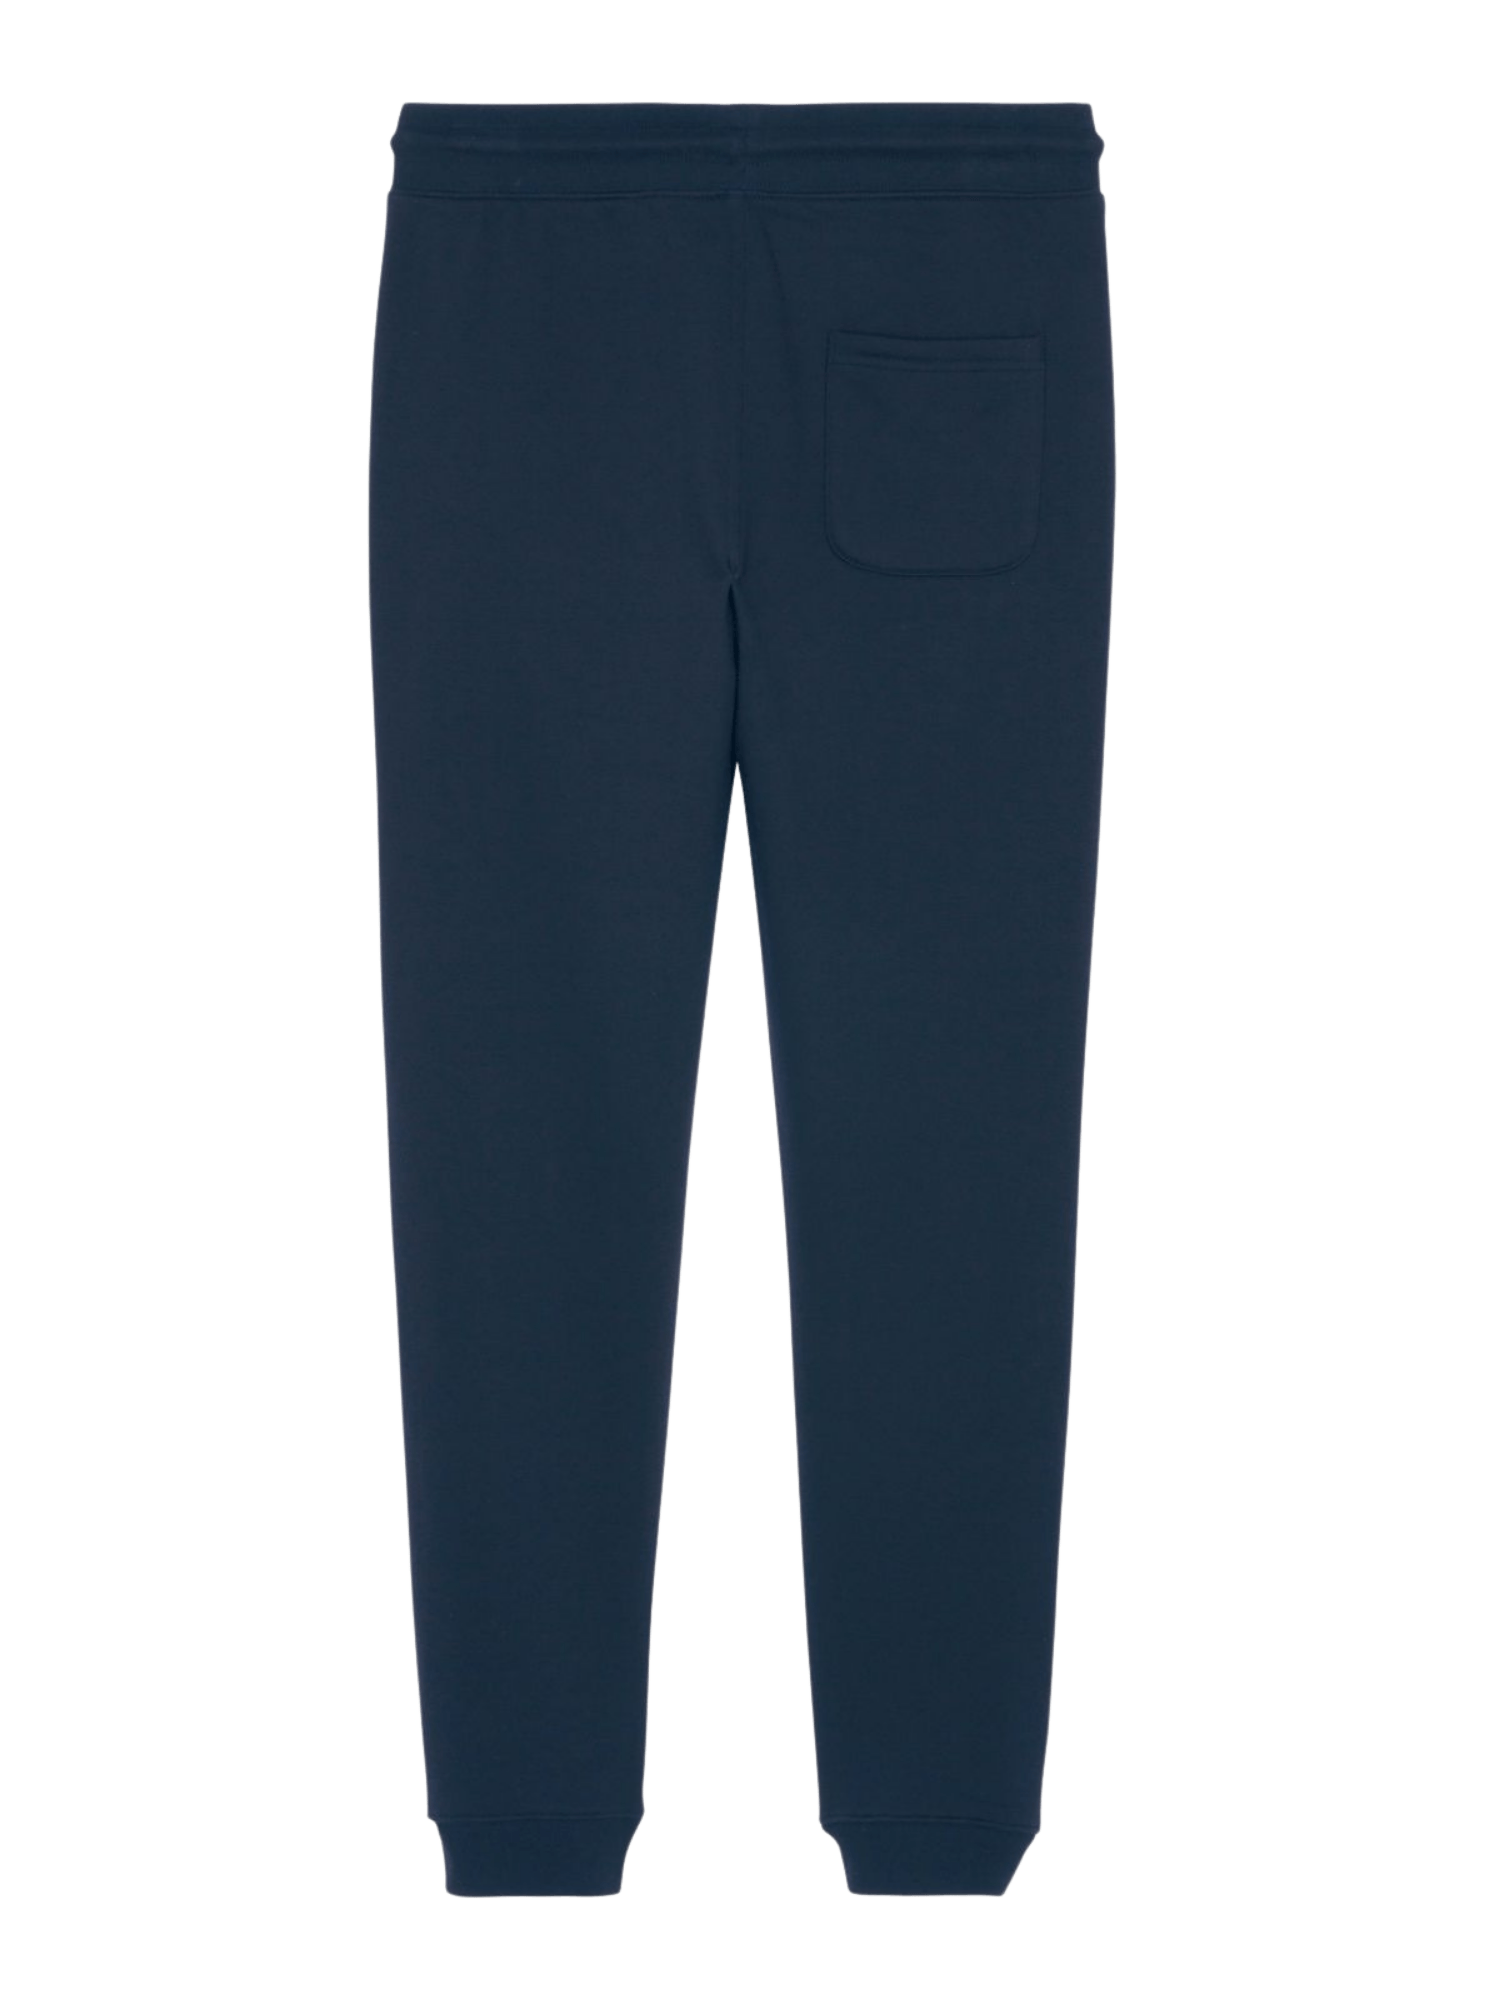 C'RIBBE Signature Print Jogging Bottoms French Navy